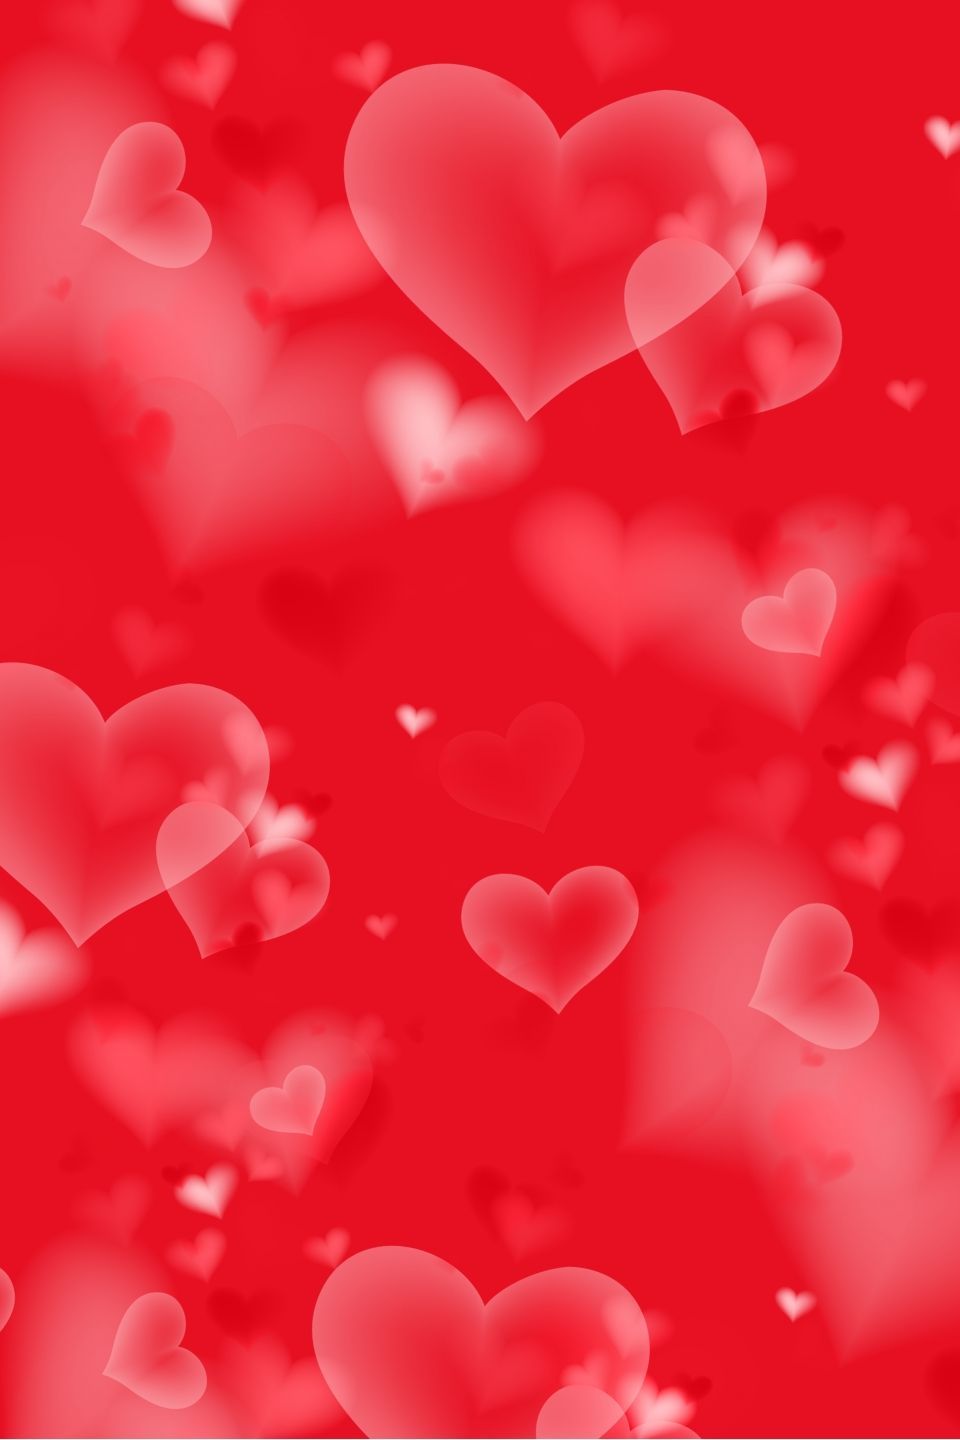 Romantic Valentine S Day Red Heart Shaped Pattern H5 Background Material. Valentine background, Photohoot backdrops, Y2k background